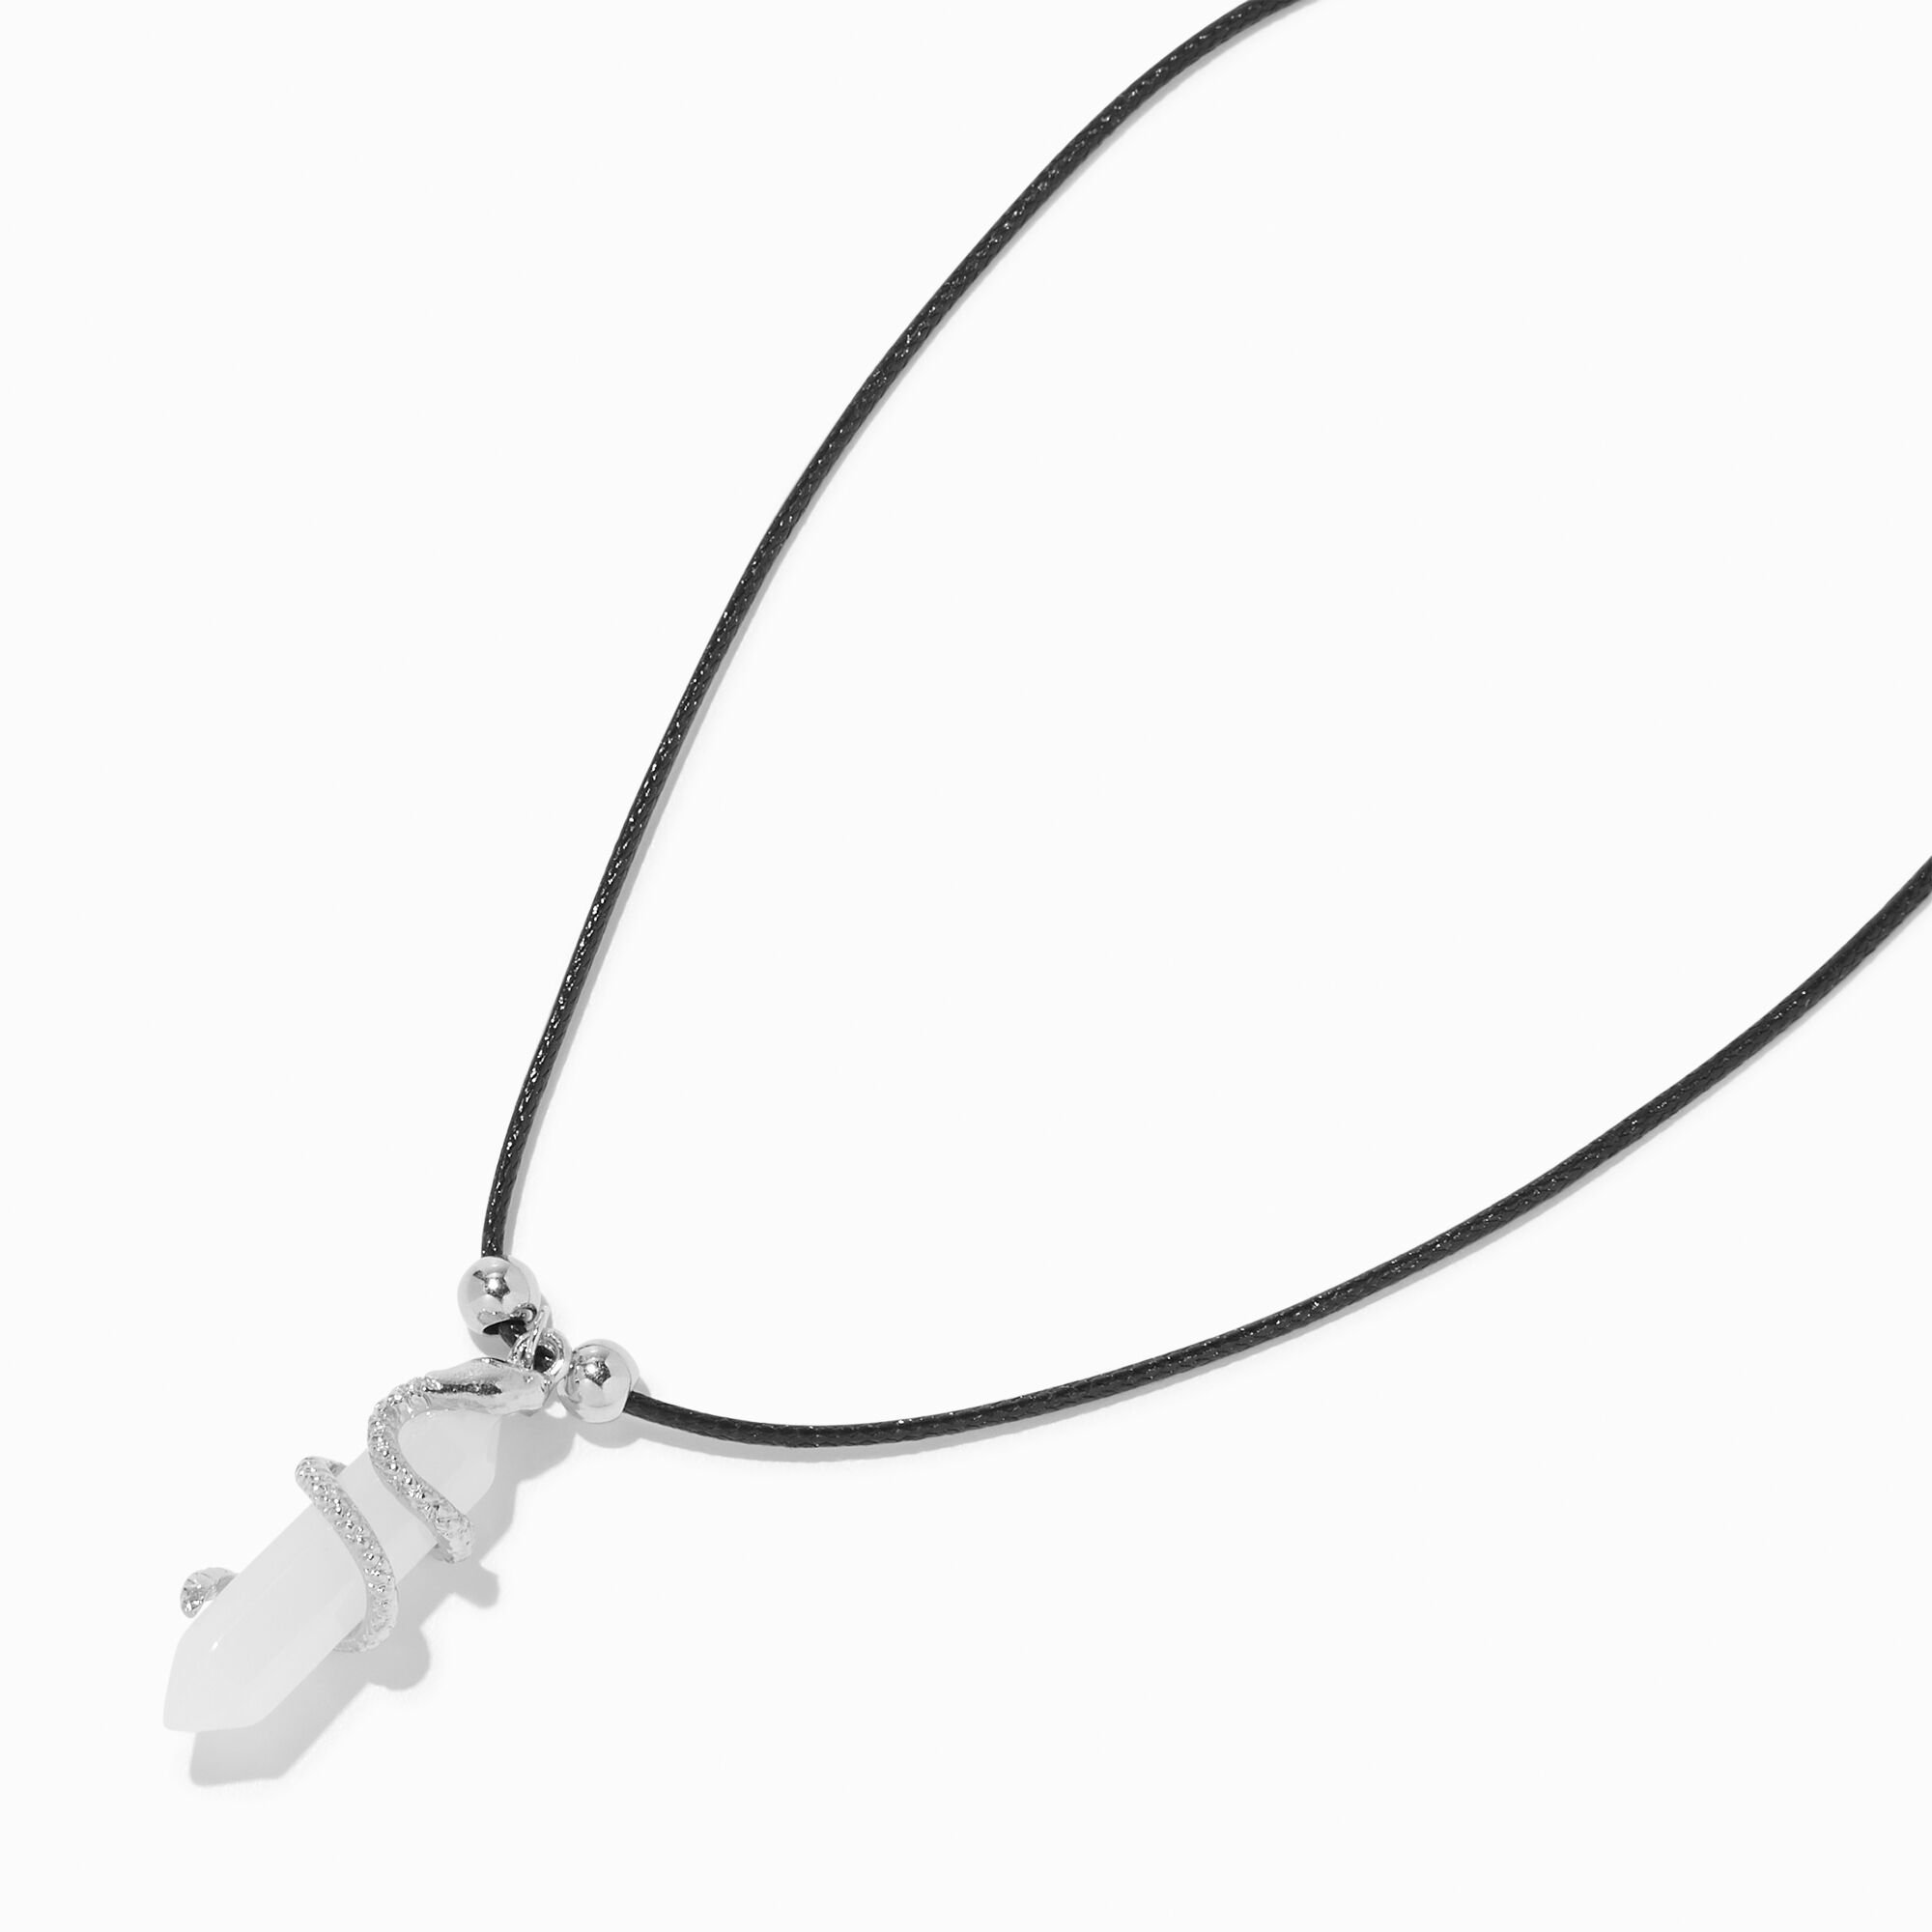 View Claires Glow In The Dark Mystical Gem With Snake Pendant Black Cord Necklace White information